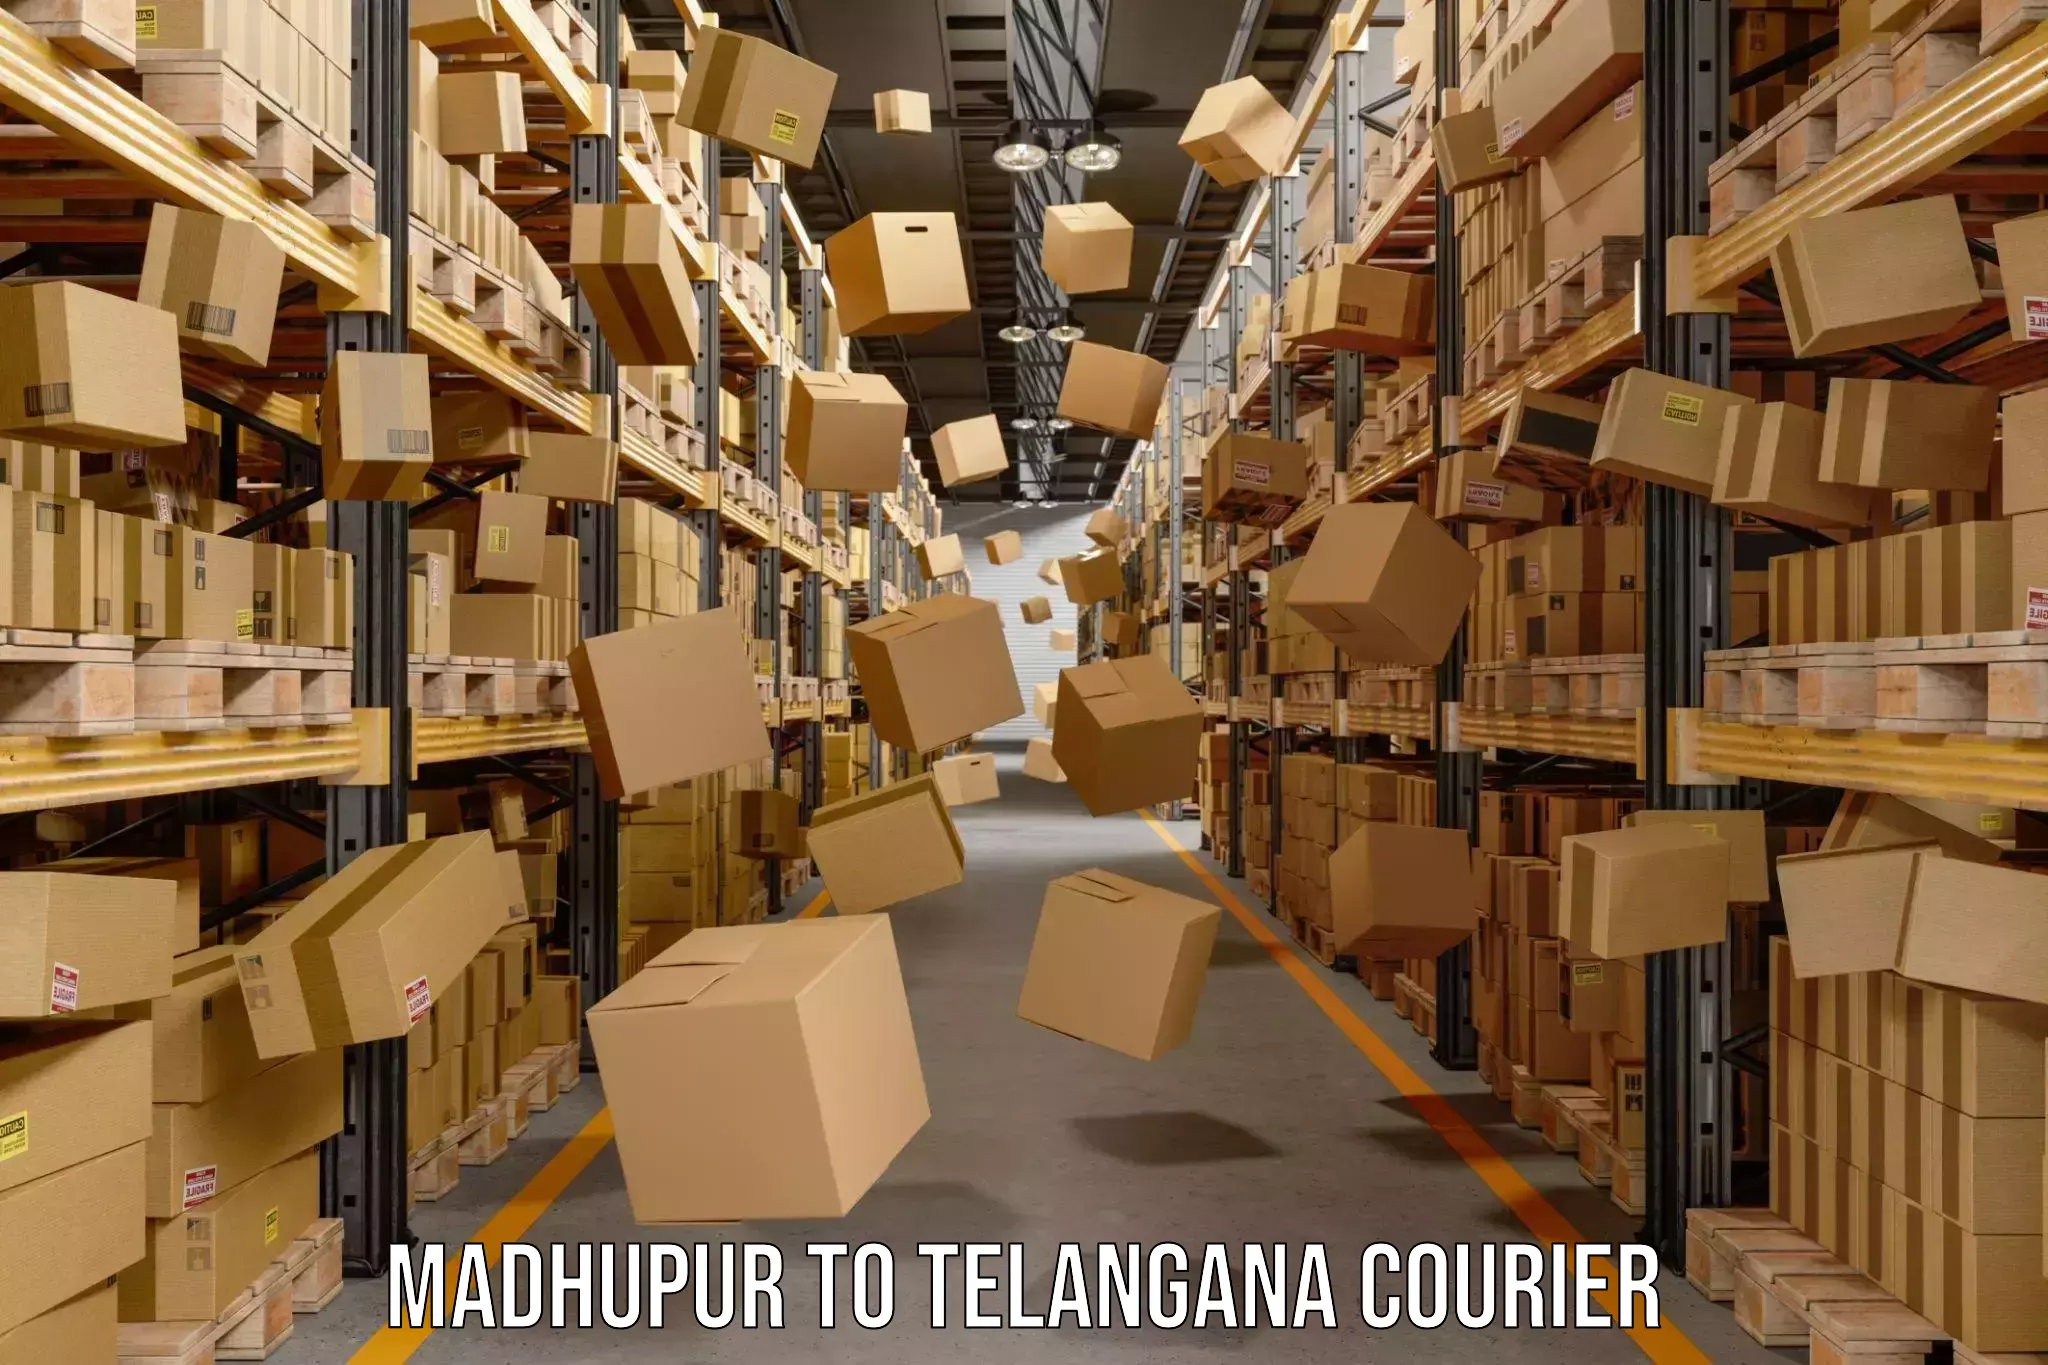 User-friendly delivery service Madhupur to Telangana